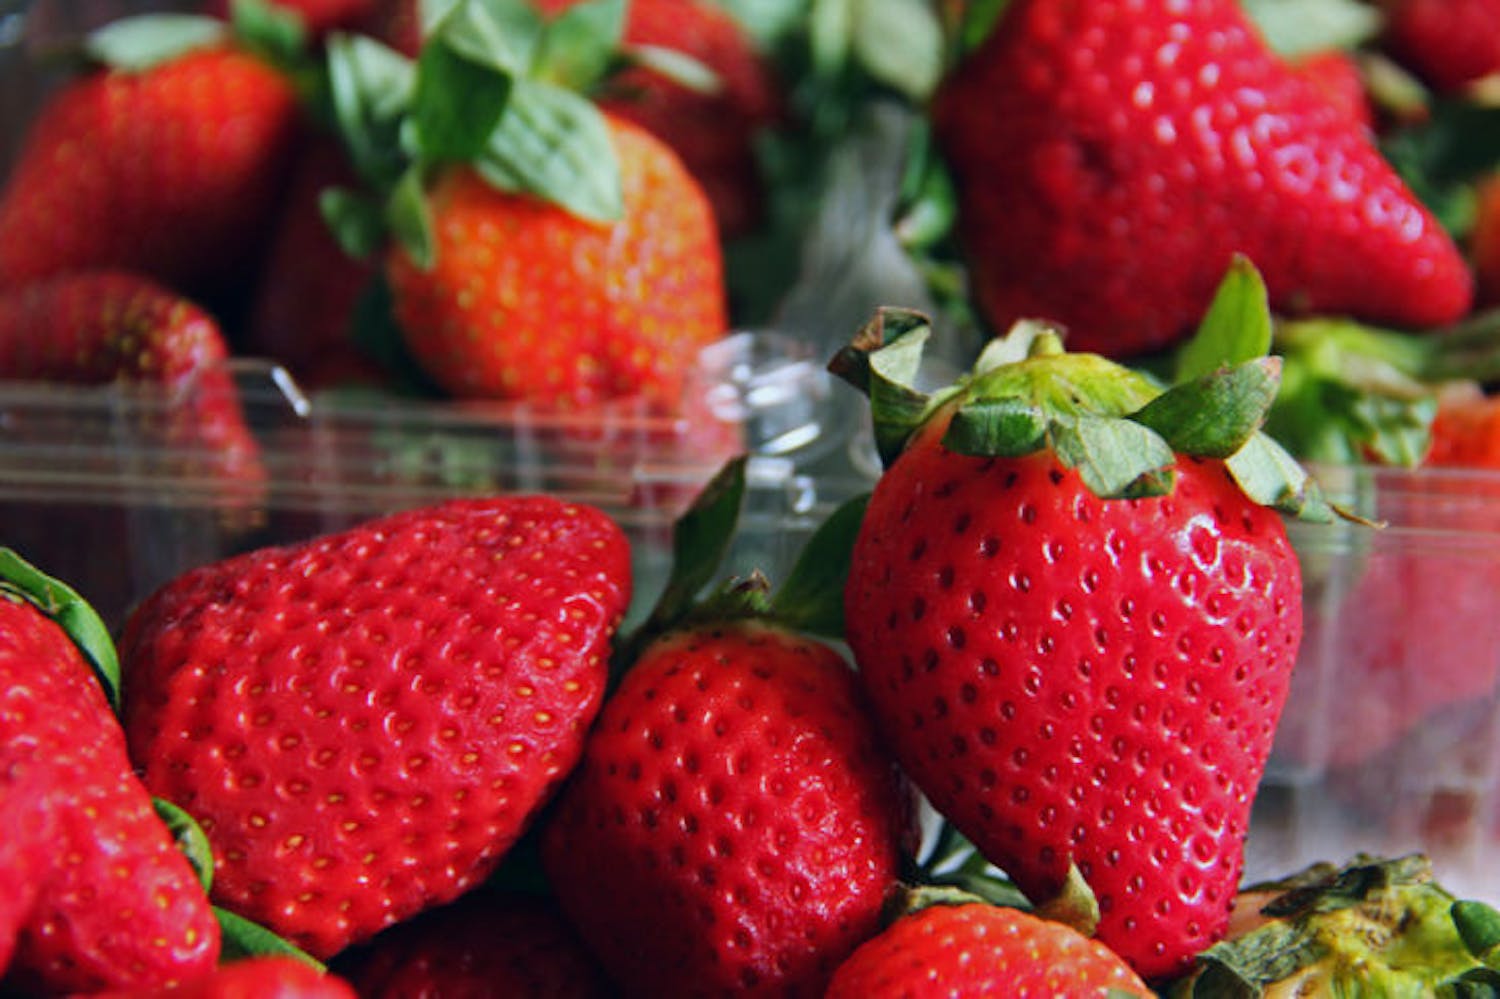 A new UF study has found compounds in strawberries that make the fruit taste sweeter. Researchers want to use this information to make a better artificial sweetener.